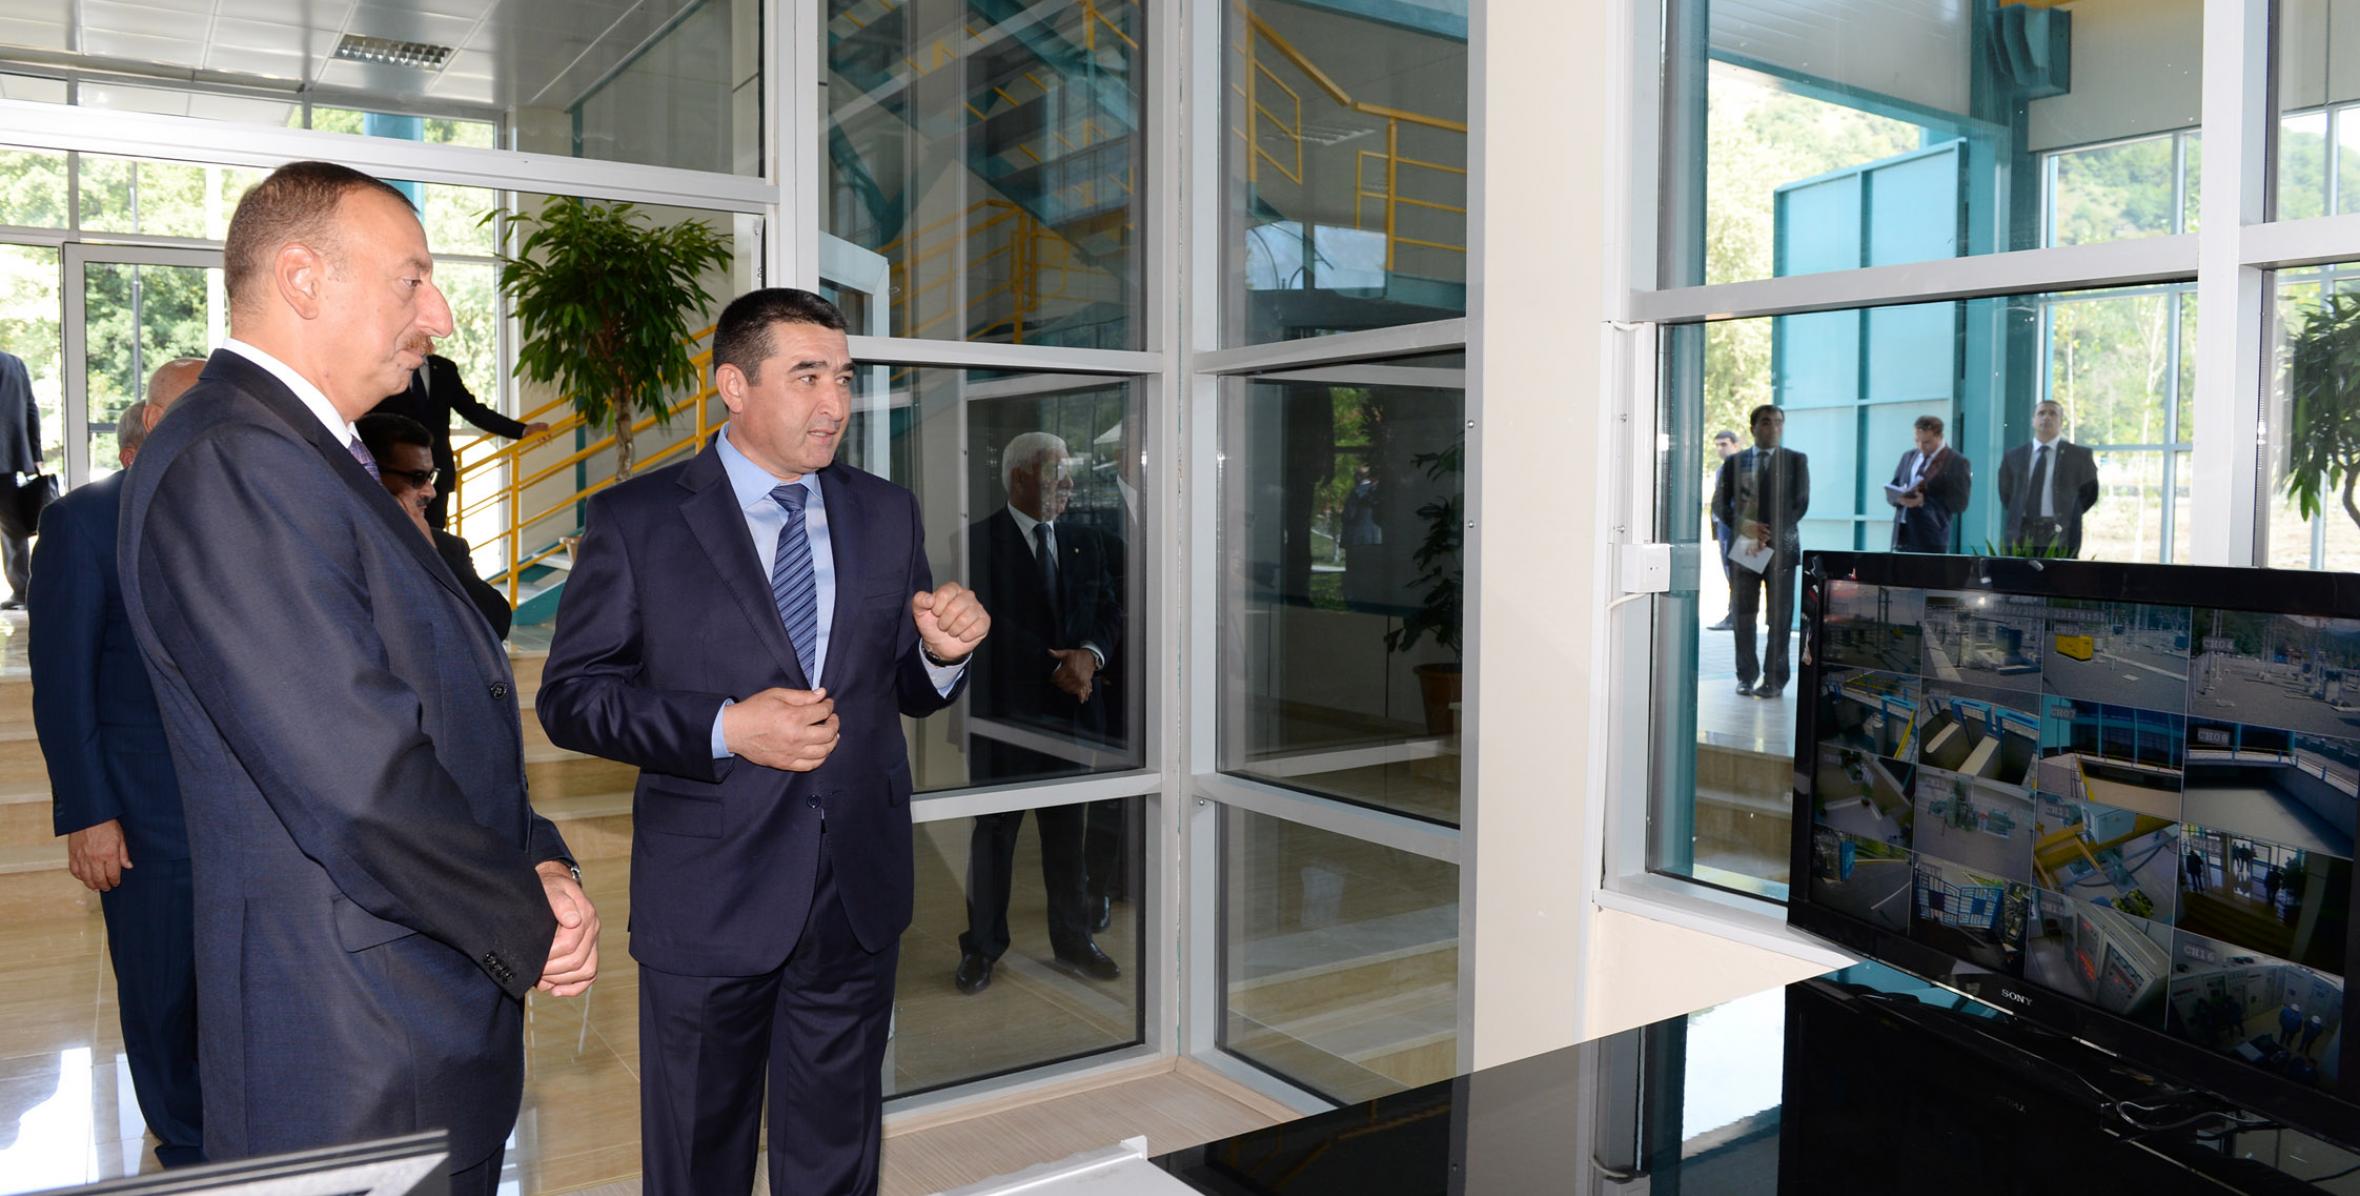 Ilham Aliyev attended the opening of hydroelectric power station “Ismayilli-1” built near Sumagalli village of Ismayilli District